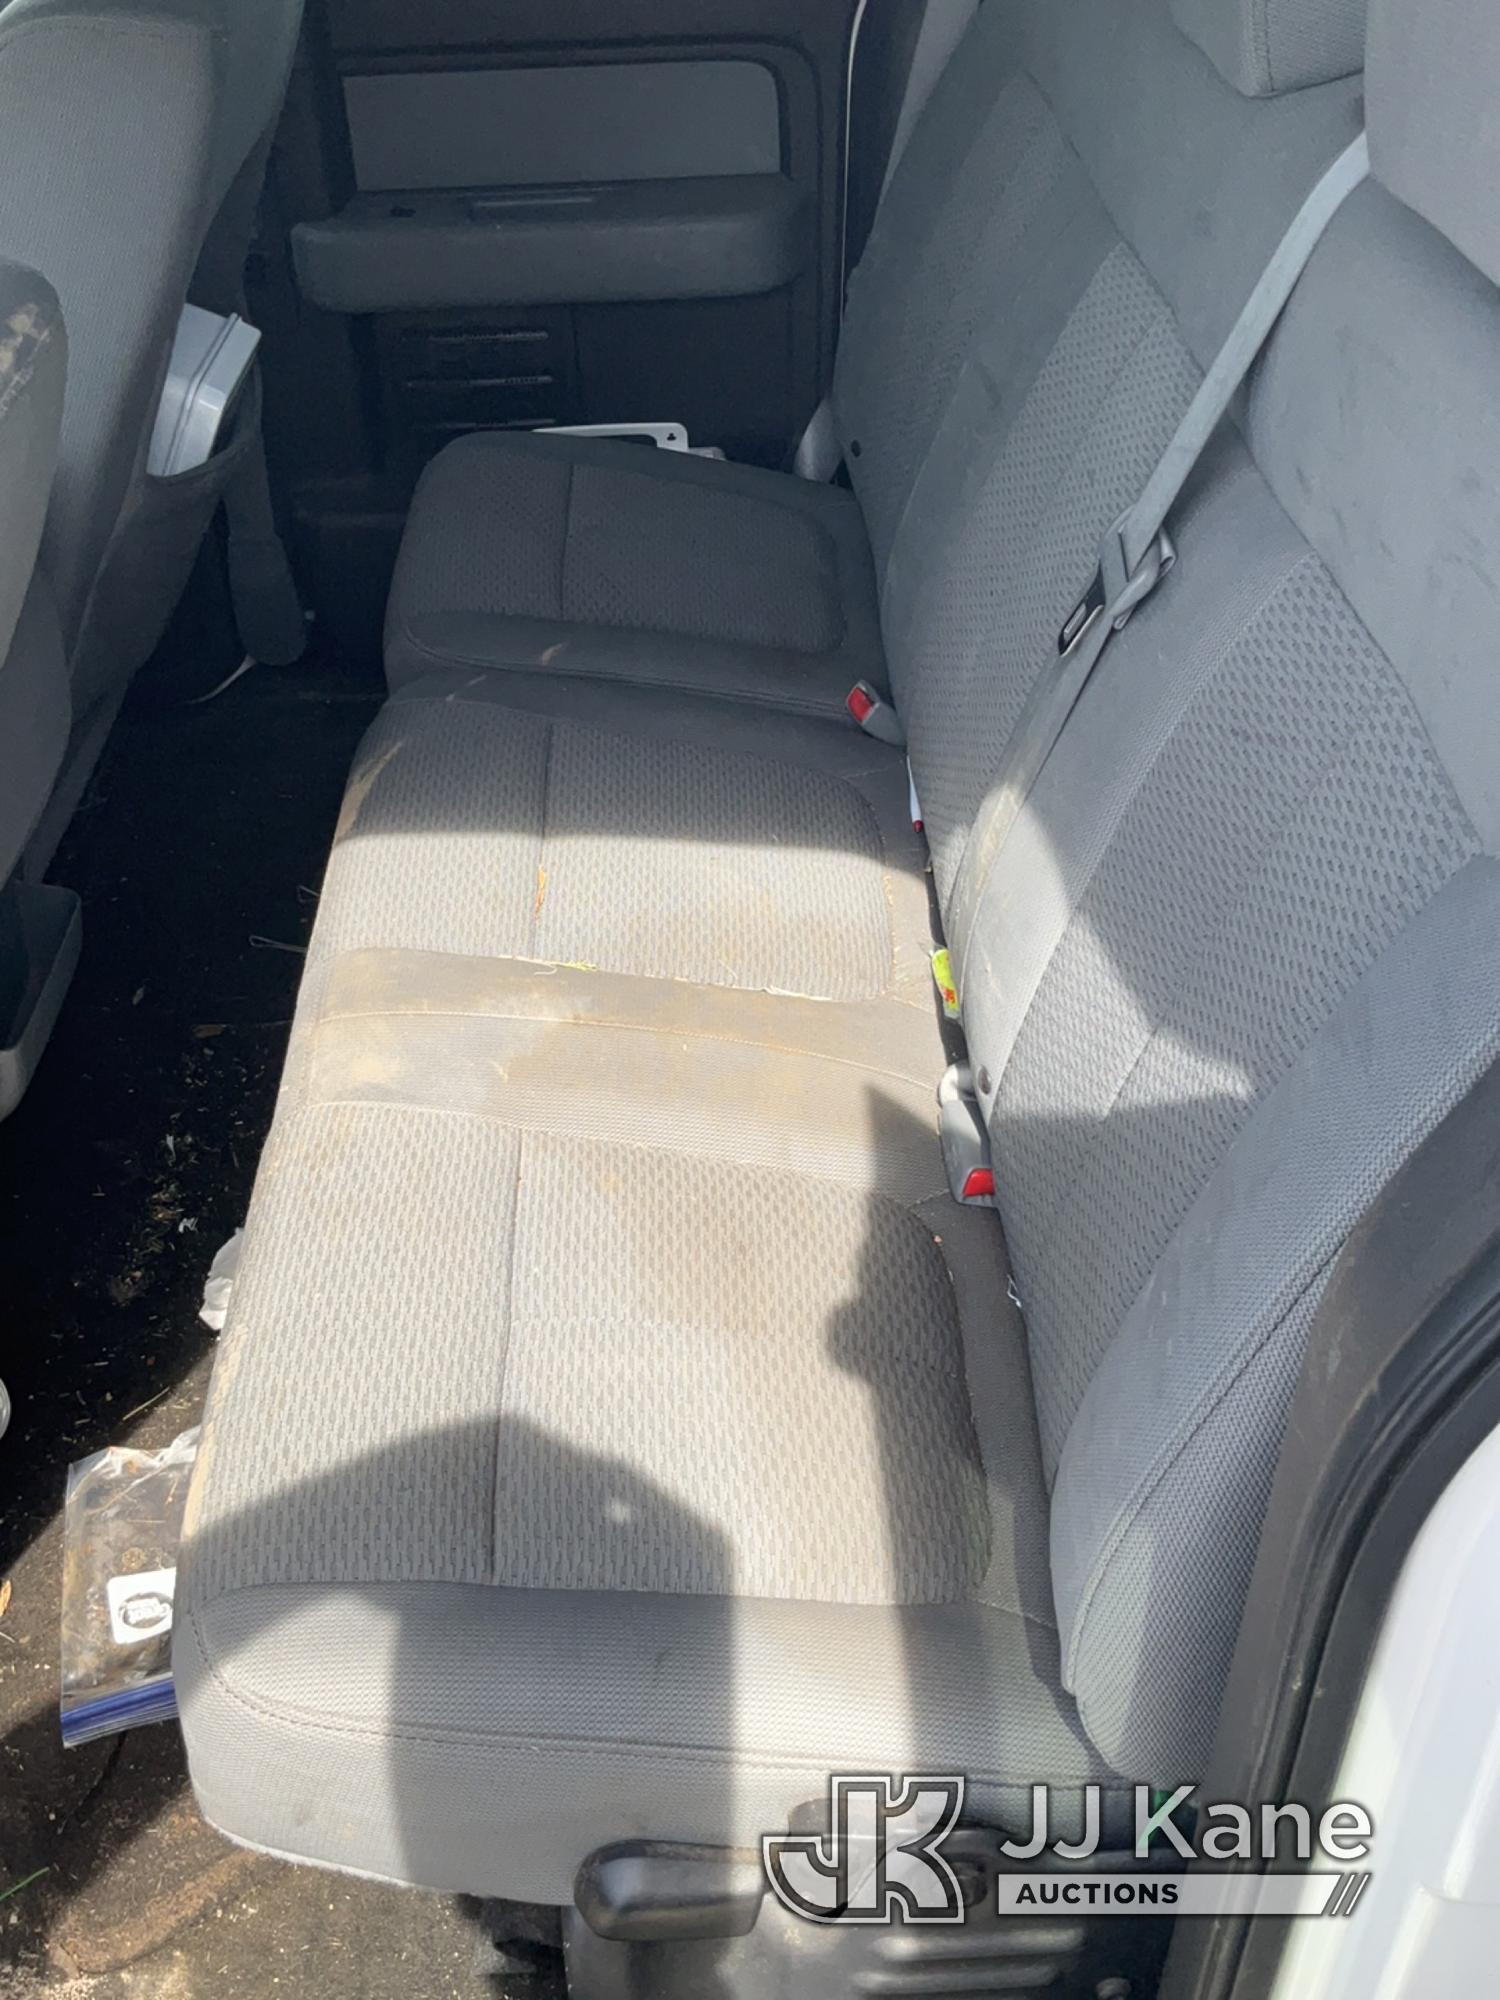 (South Beloit, IL) 2014 Ford F150 Extended-Cab Pickup Truck Runs, Moves, Airbag Light On, Check Engi